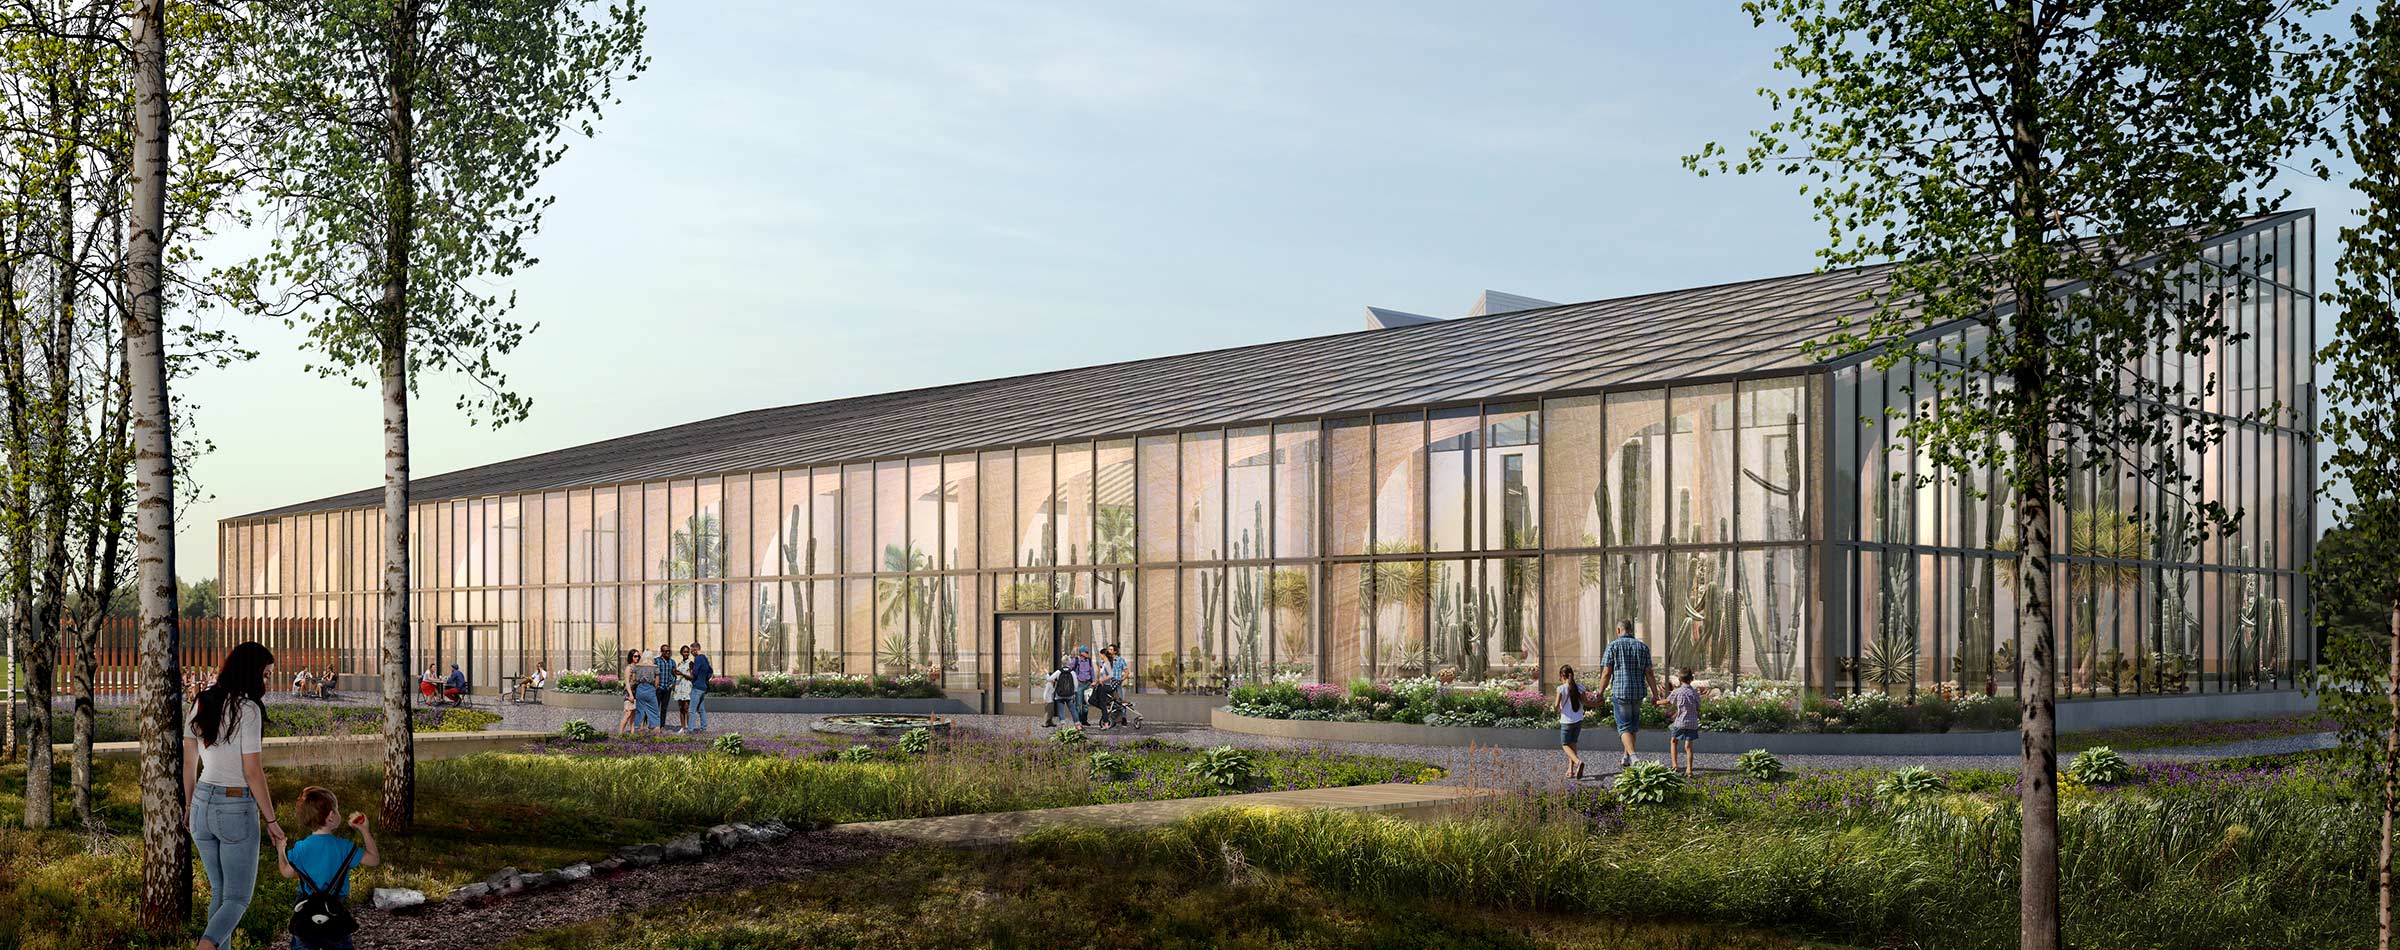 A rendering of the conservatory addition from the exterior.